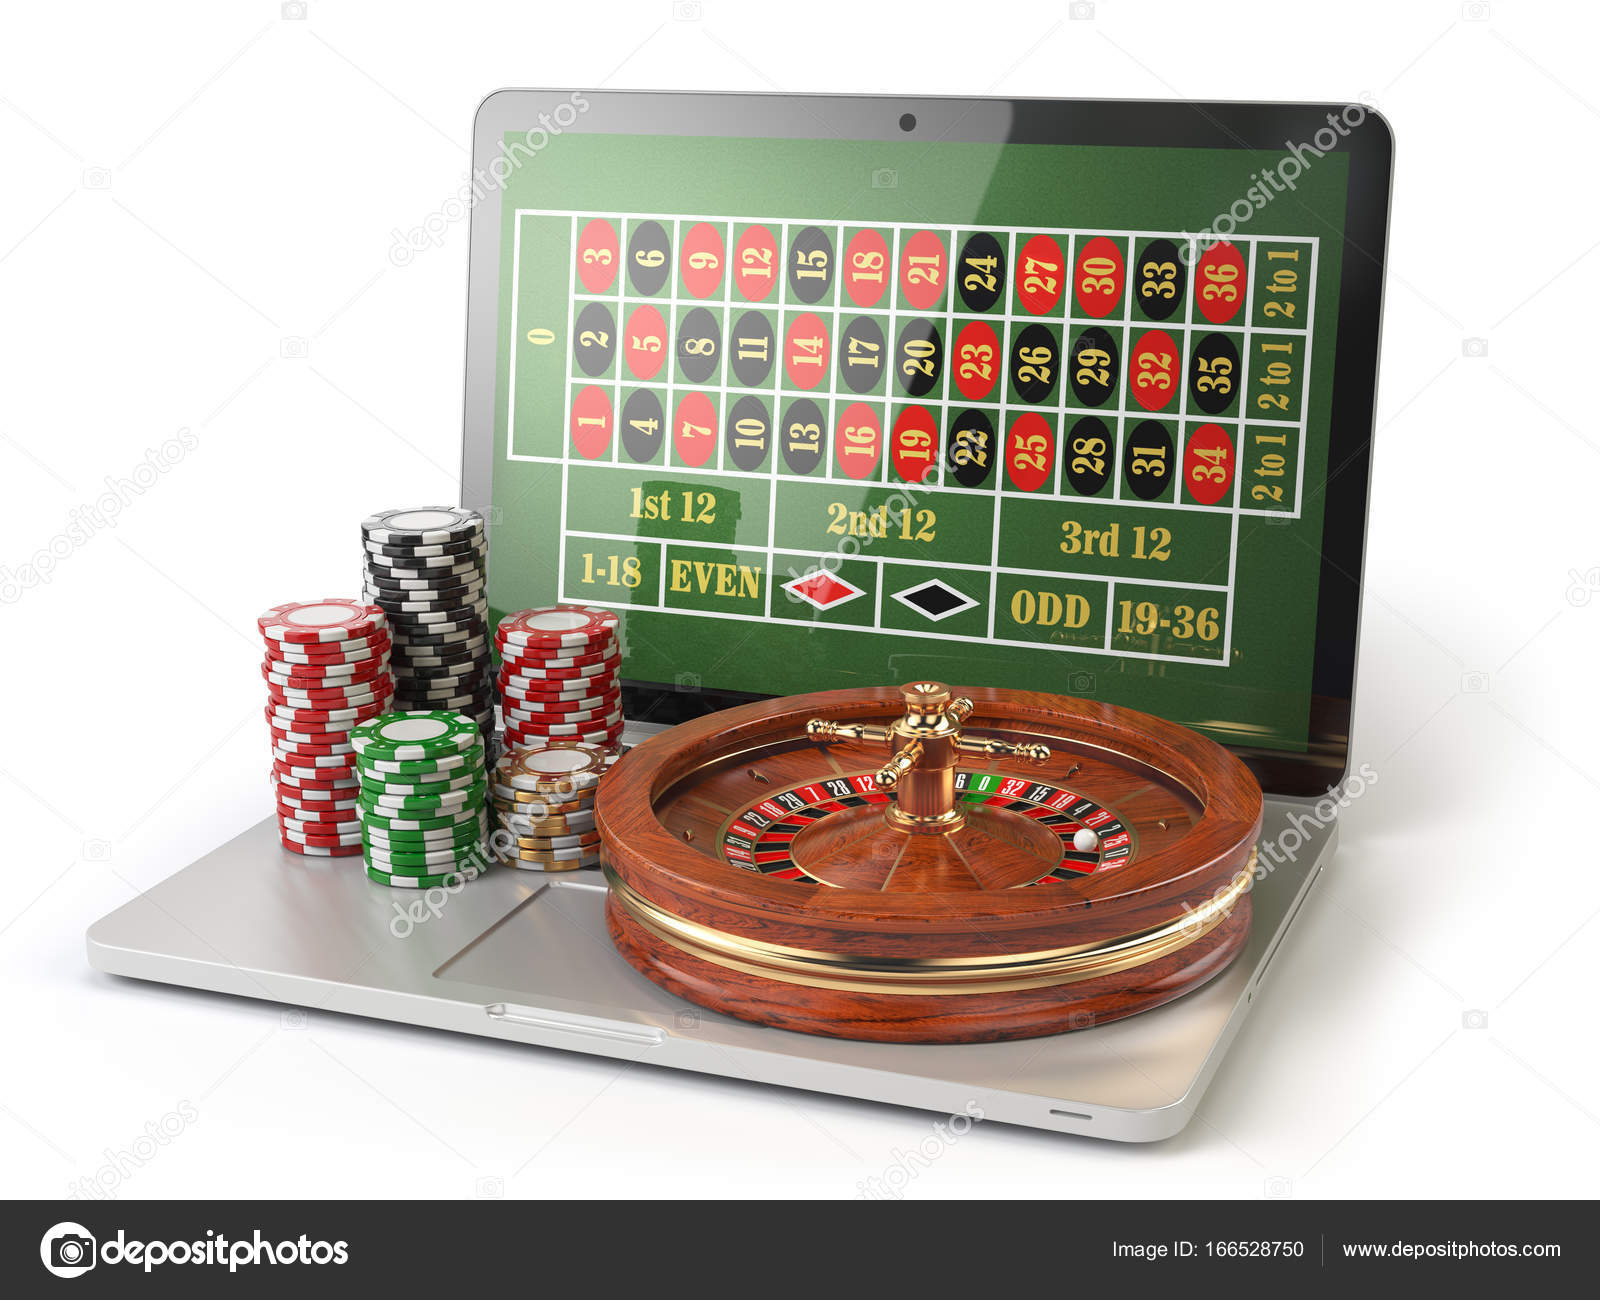 Top microgaming cassino online bitcoin